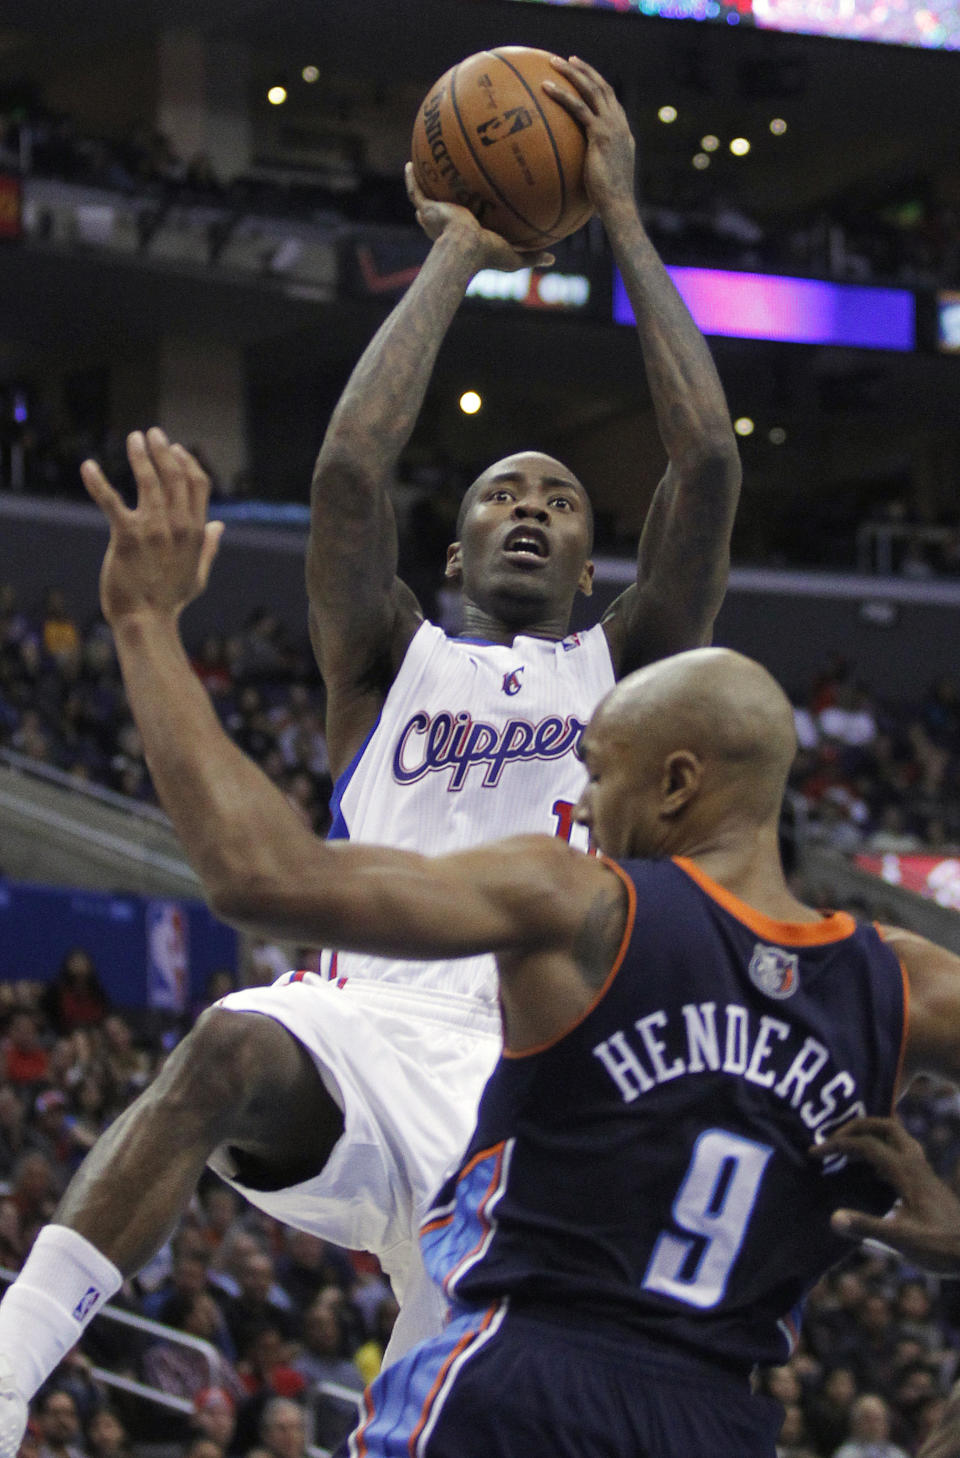 Los Angeles Clippers guard Jamal Crawford, left, shoots over Charlotte Bobcats guard Gerald Henderson (9) during the first half of an NBA basketball game Wednesday, Jan. 1, 2014, in Los Angeles. (AP Photo/Alex Gallardo)